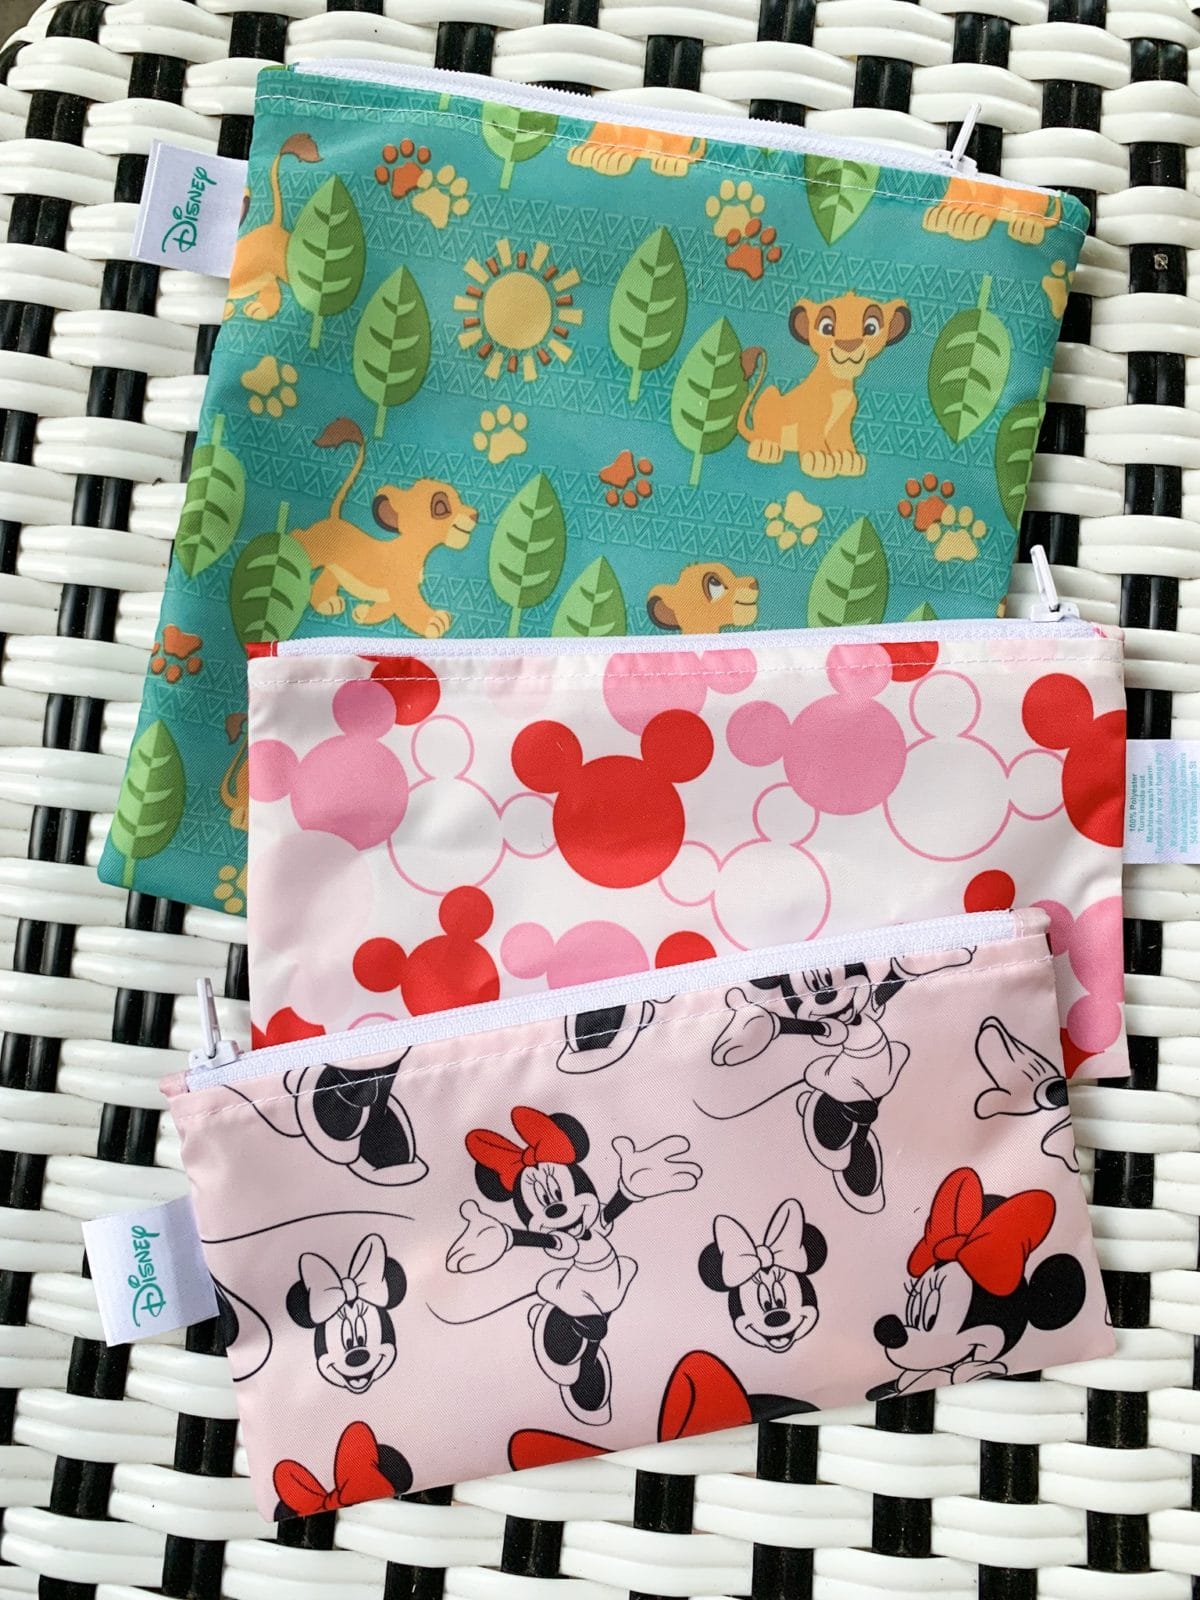 washable and reusable snack bags